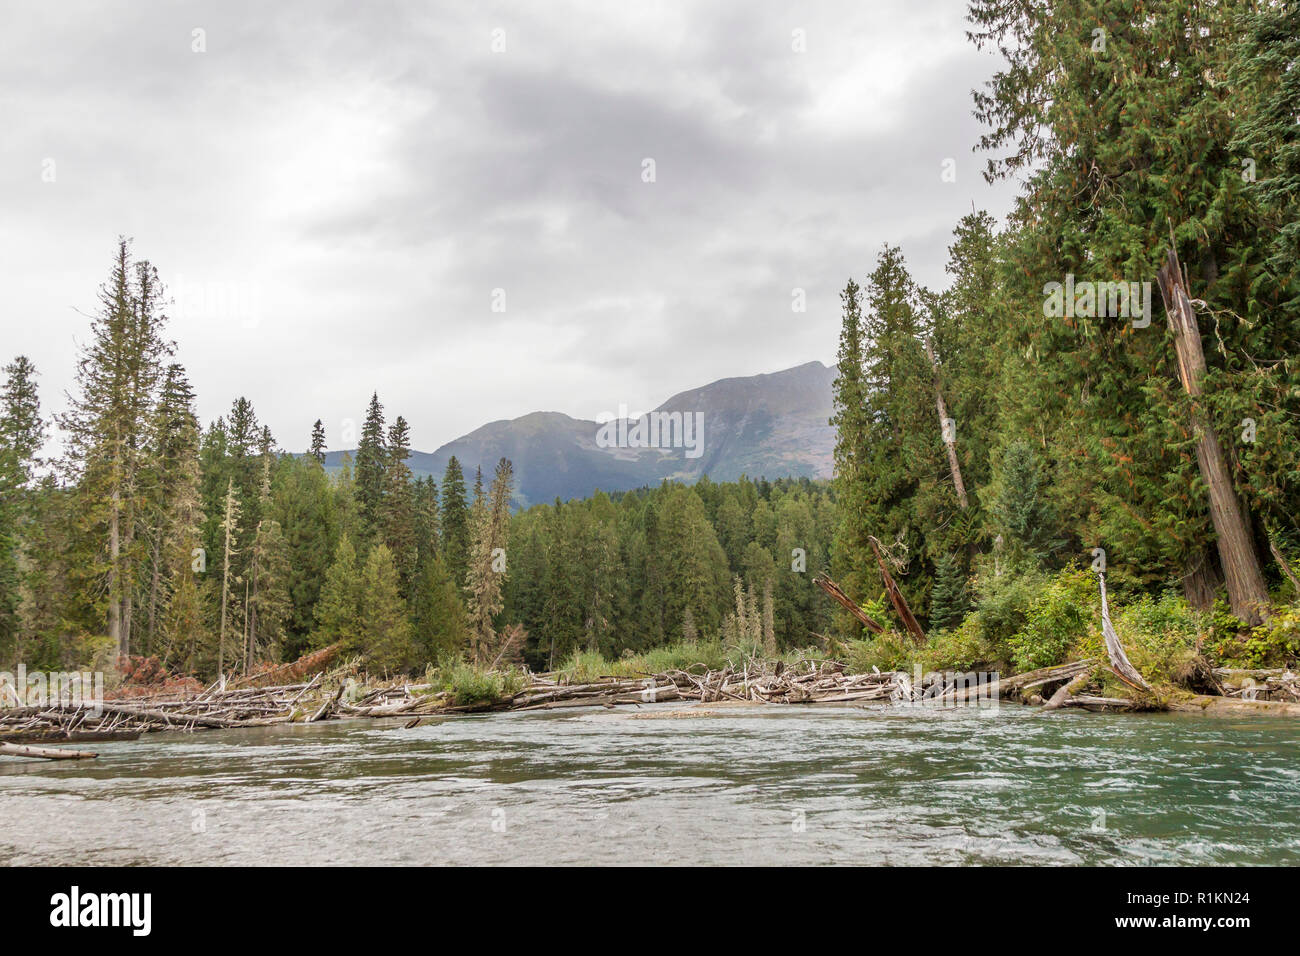 River scene near the head of the Mitchell river in the Cariboo Mountains Park, British Columbia, Canada Stock Photo